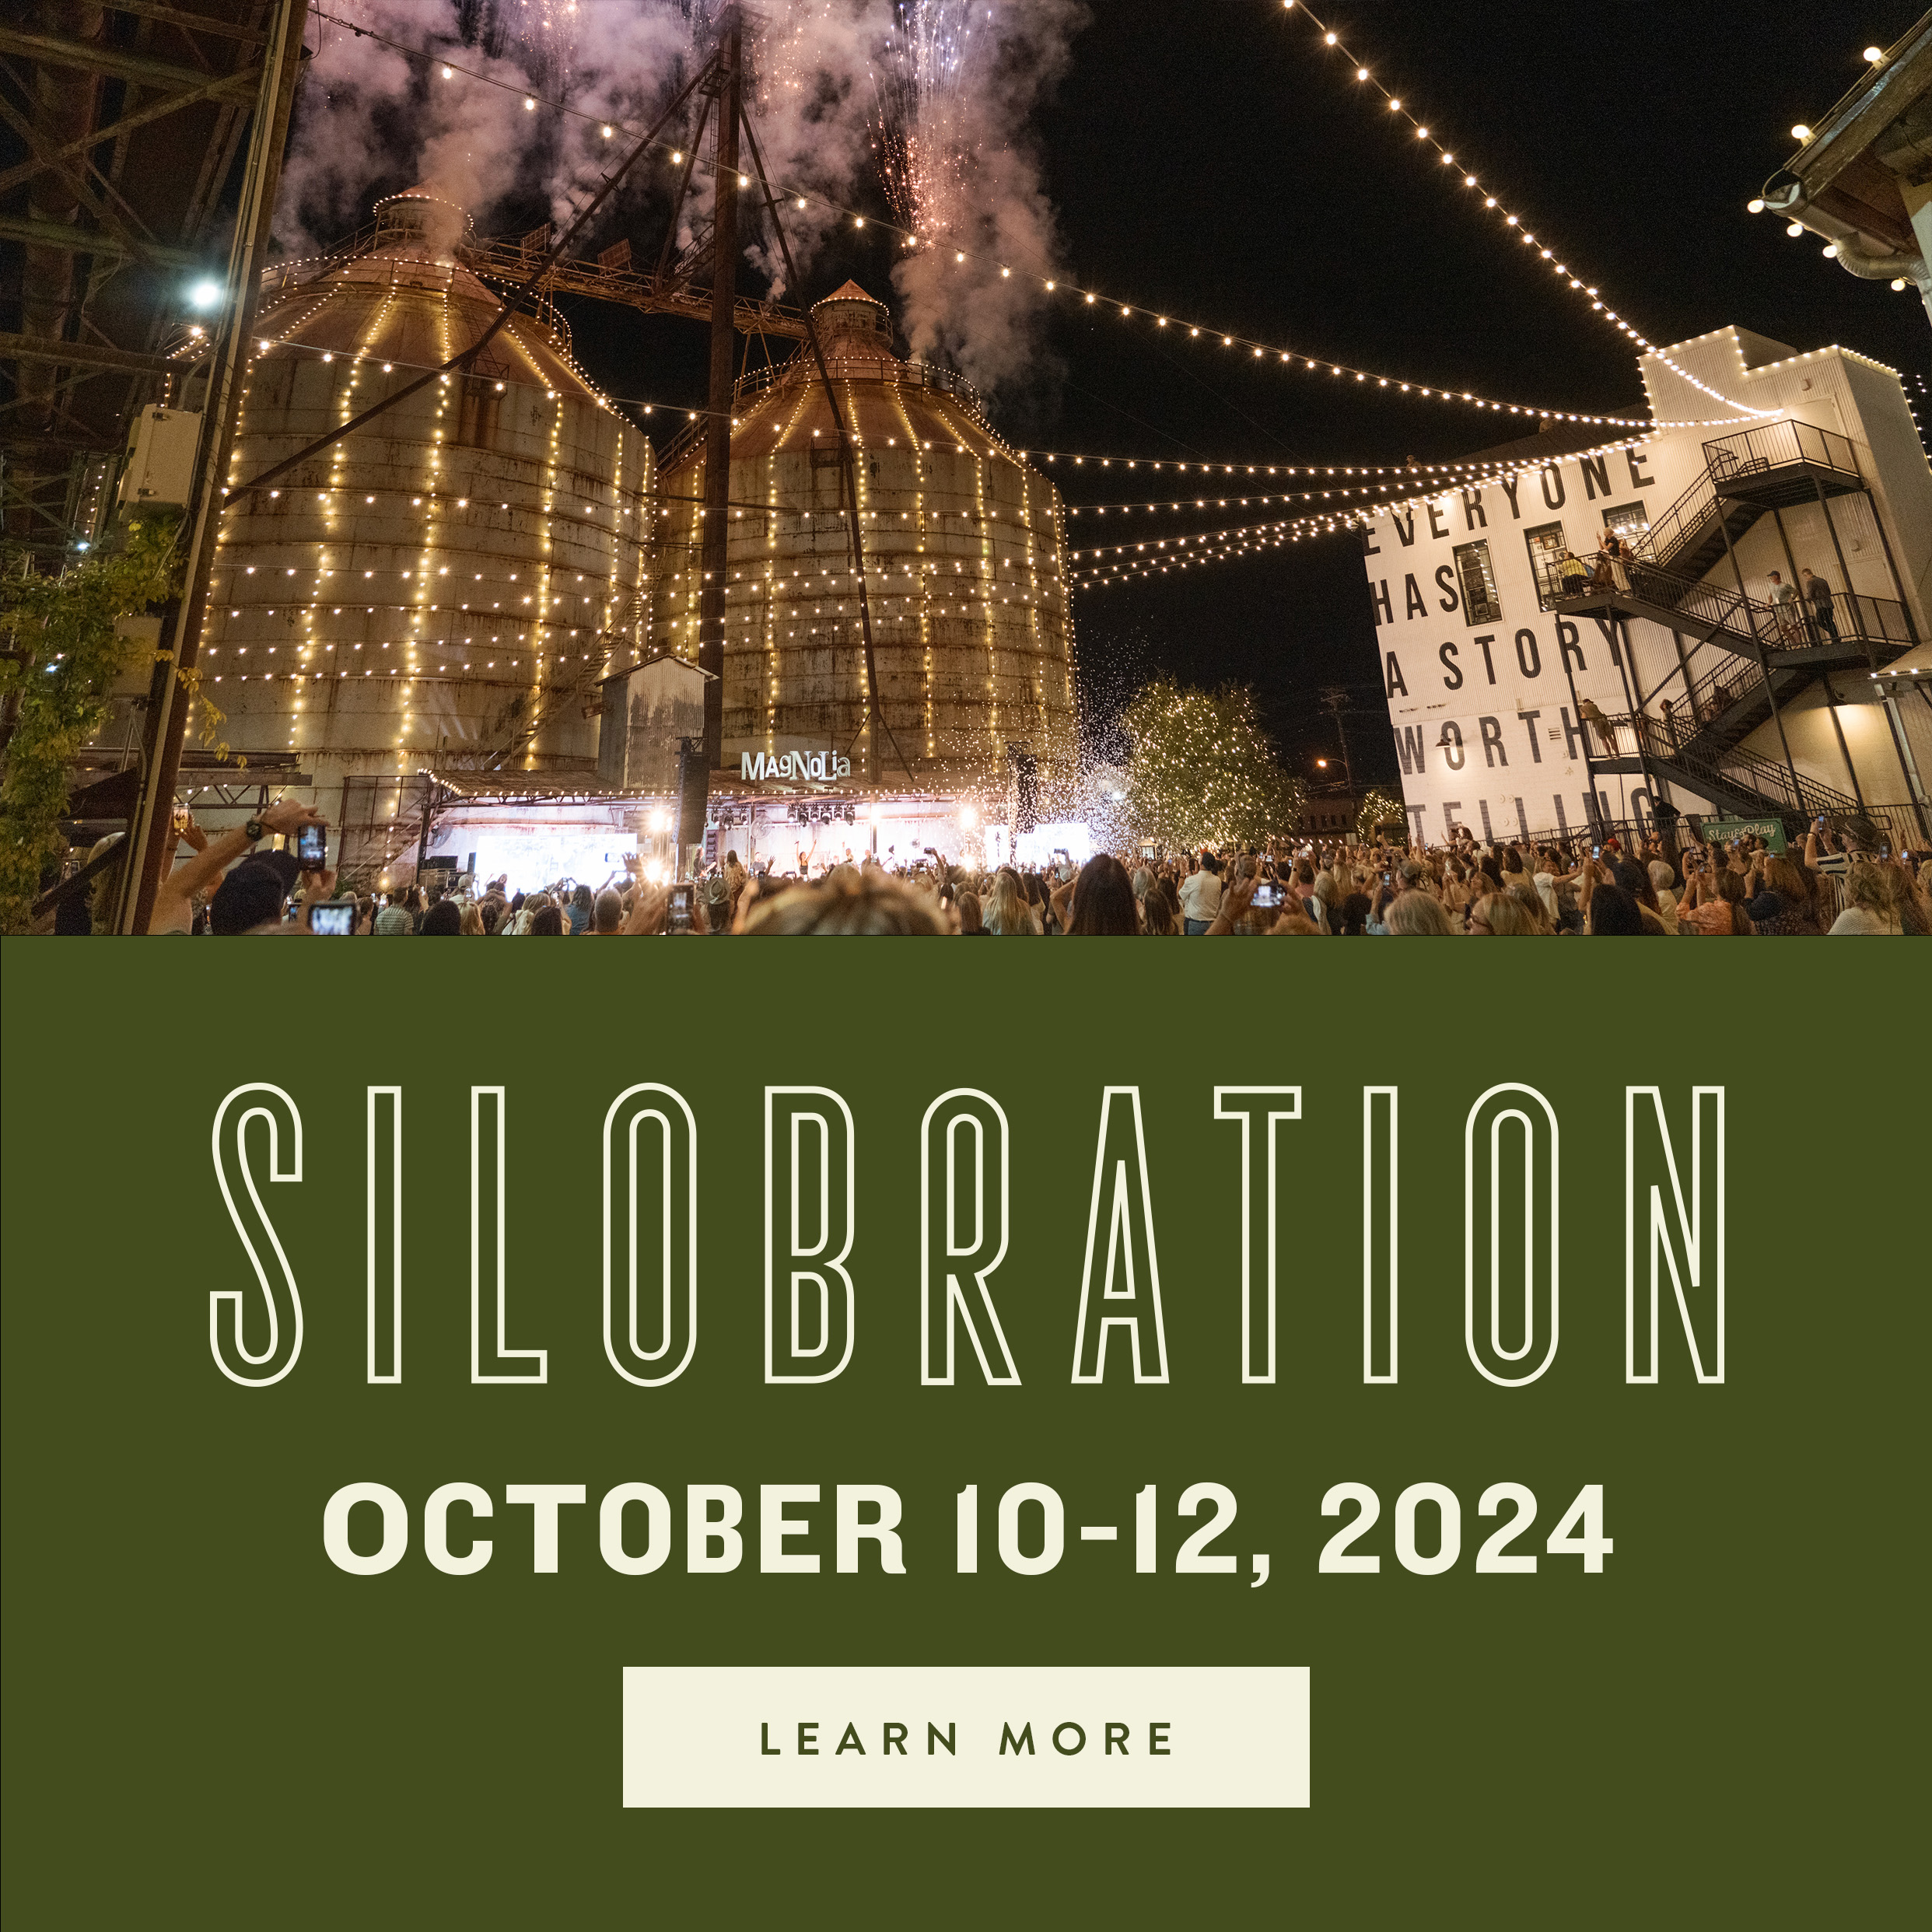 Silobration 2024 coming october 10 through october 12. click to learn more